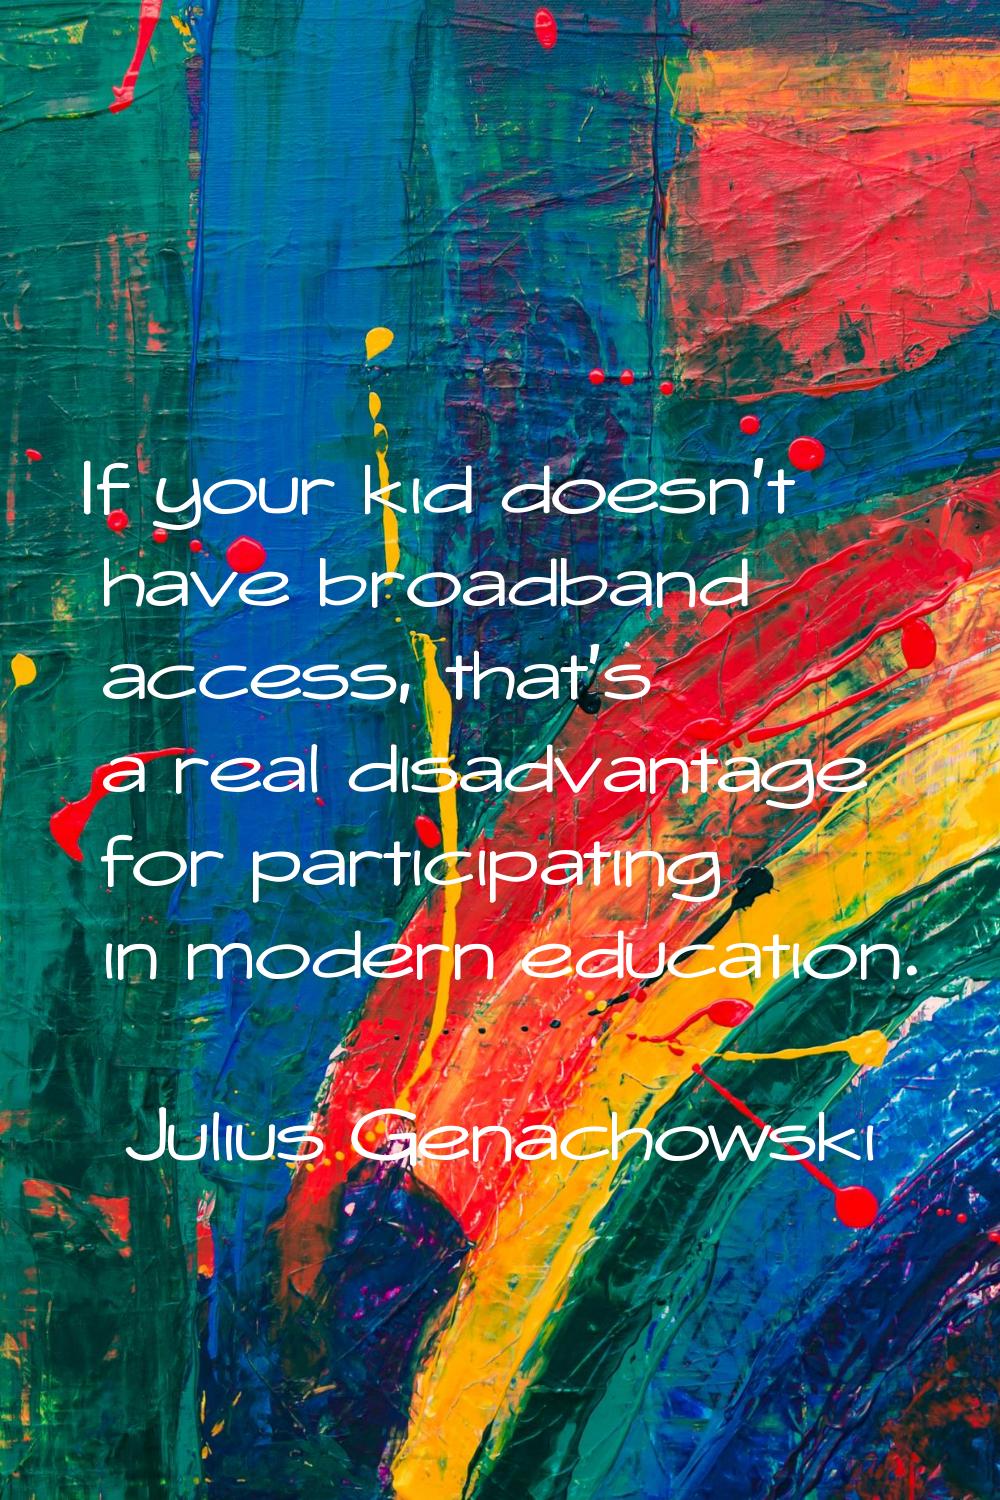 If your kid doesn't have broadband access, that's a real disadvantage for participating in modern e